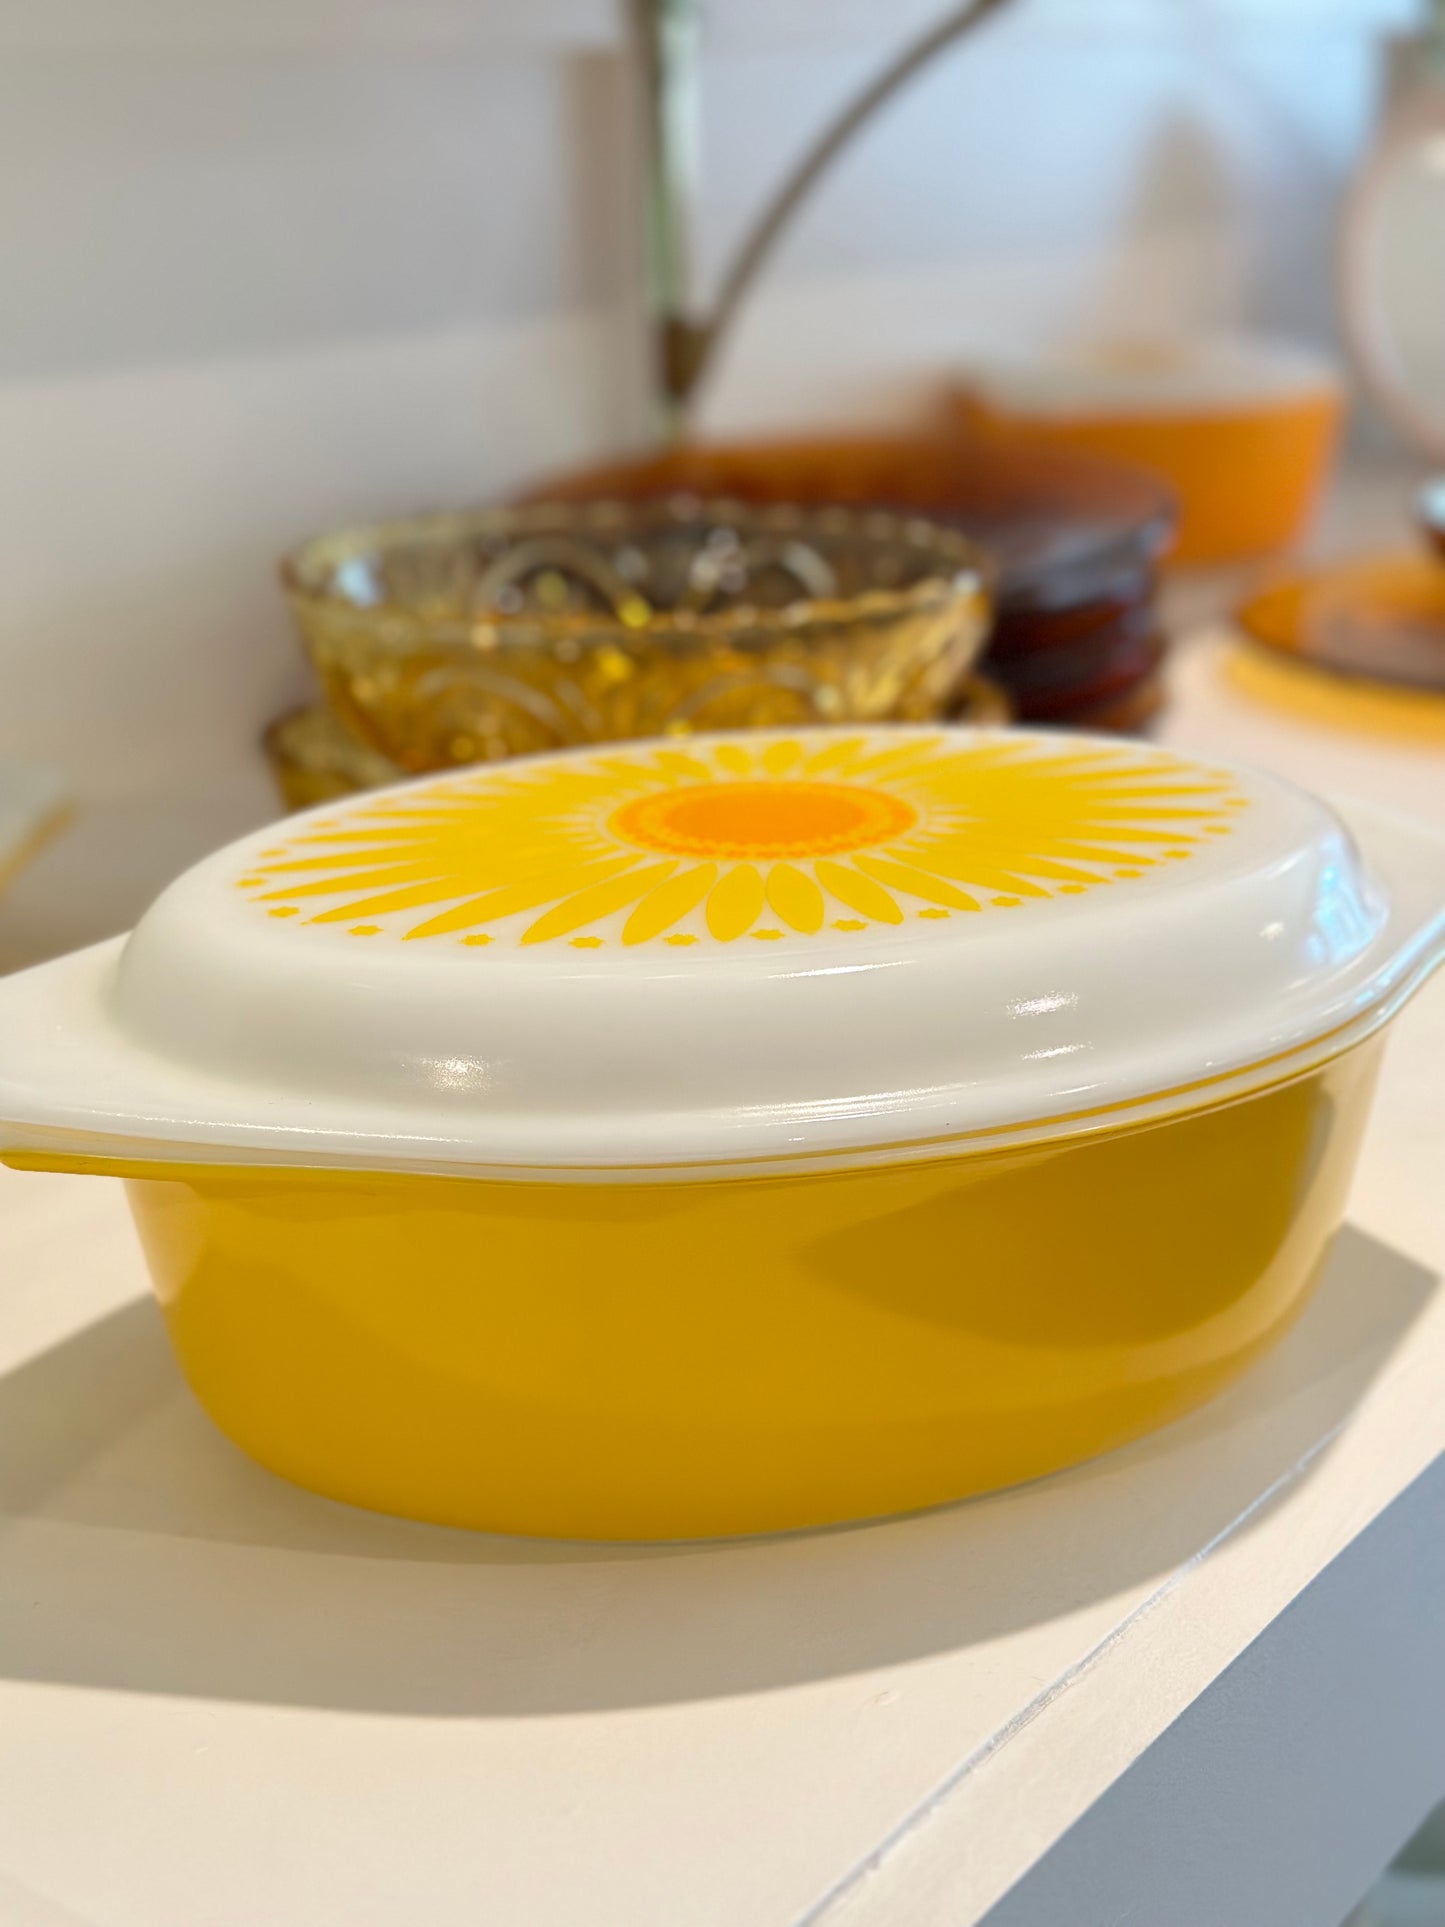 Sunflower Personalized Casserole Dish, Pyrex Baking Dish with Lid